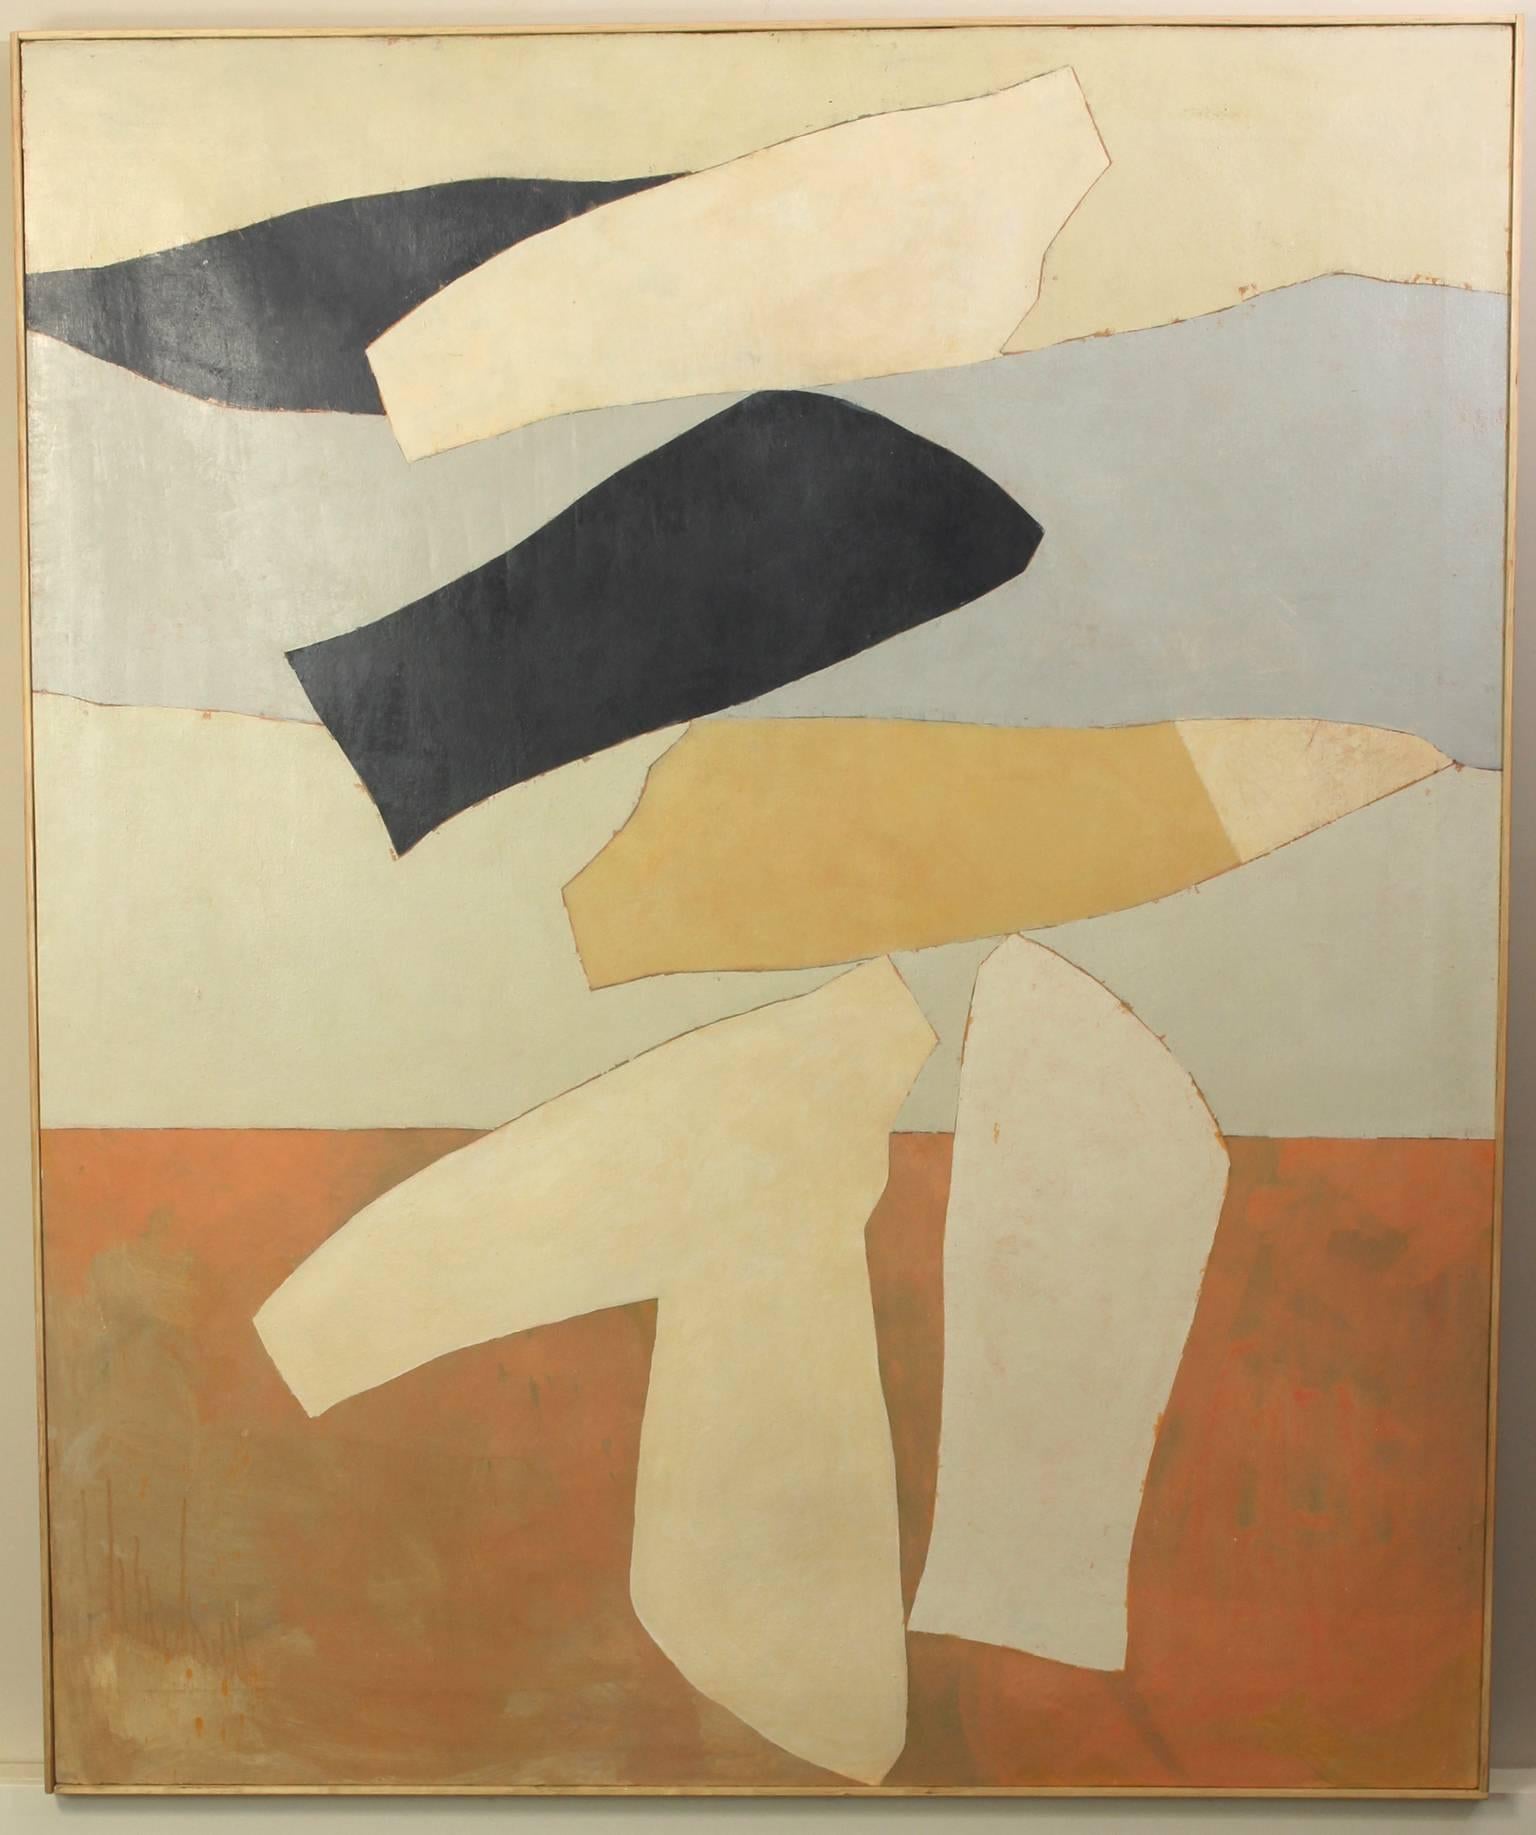 A very large late 20th century acrylic on canvas abstract painting in muted earth tones set in a limed wood frame by David Bell.